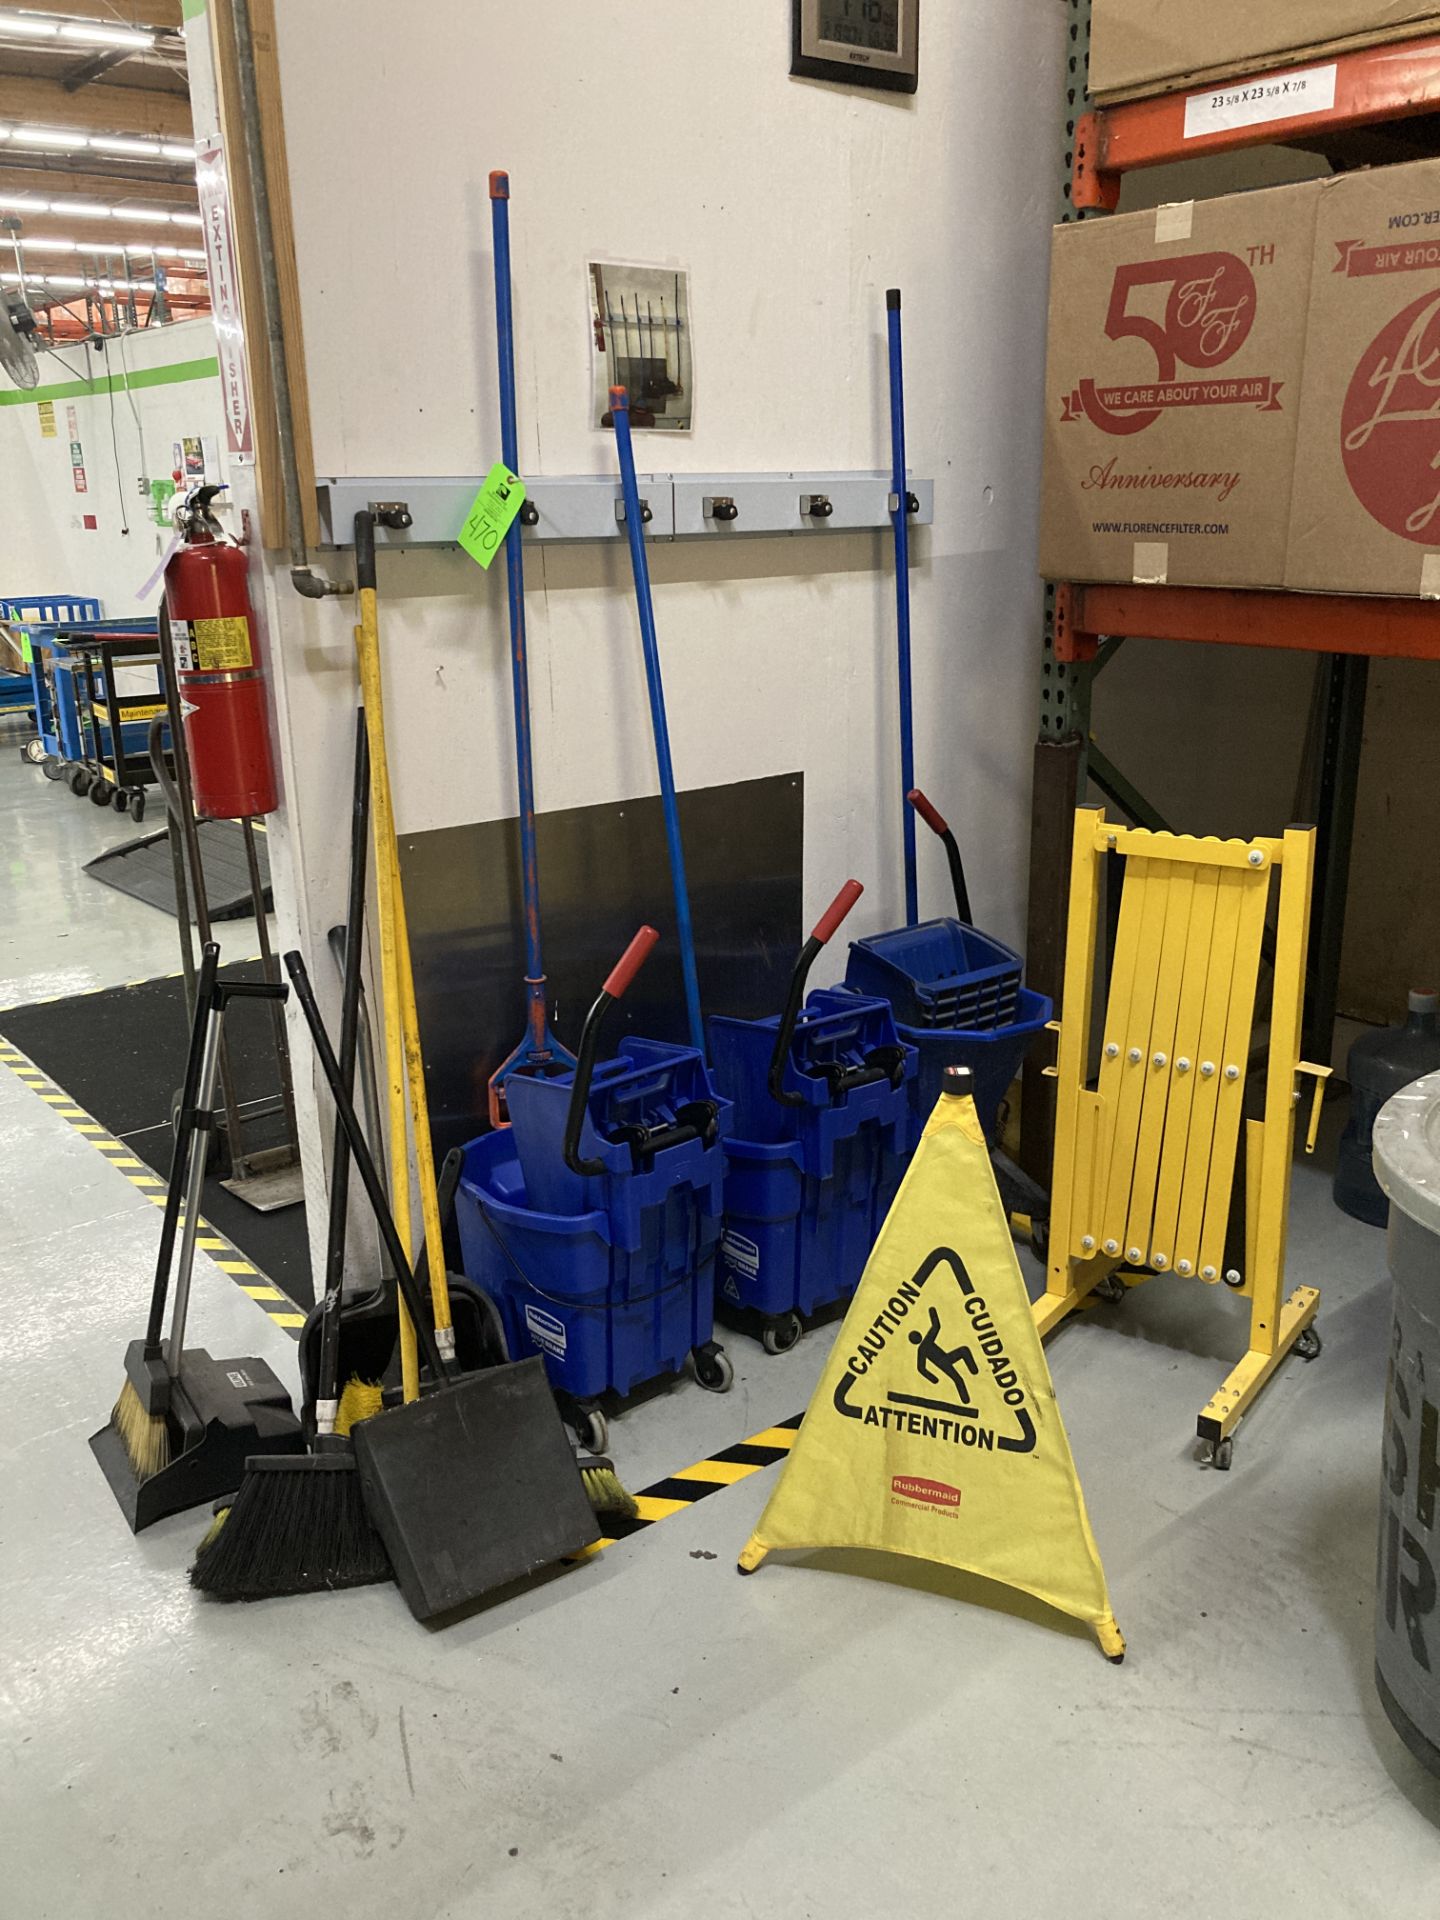 LOT OF mops with bucket, brooms, waste container , portable safety barrier Rigging Fee: $ 100